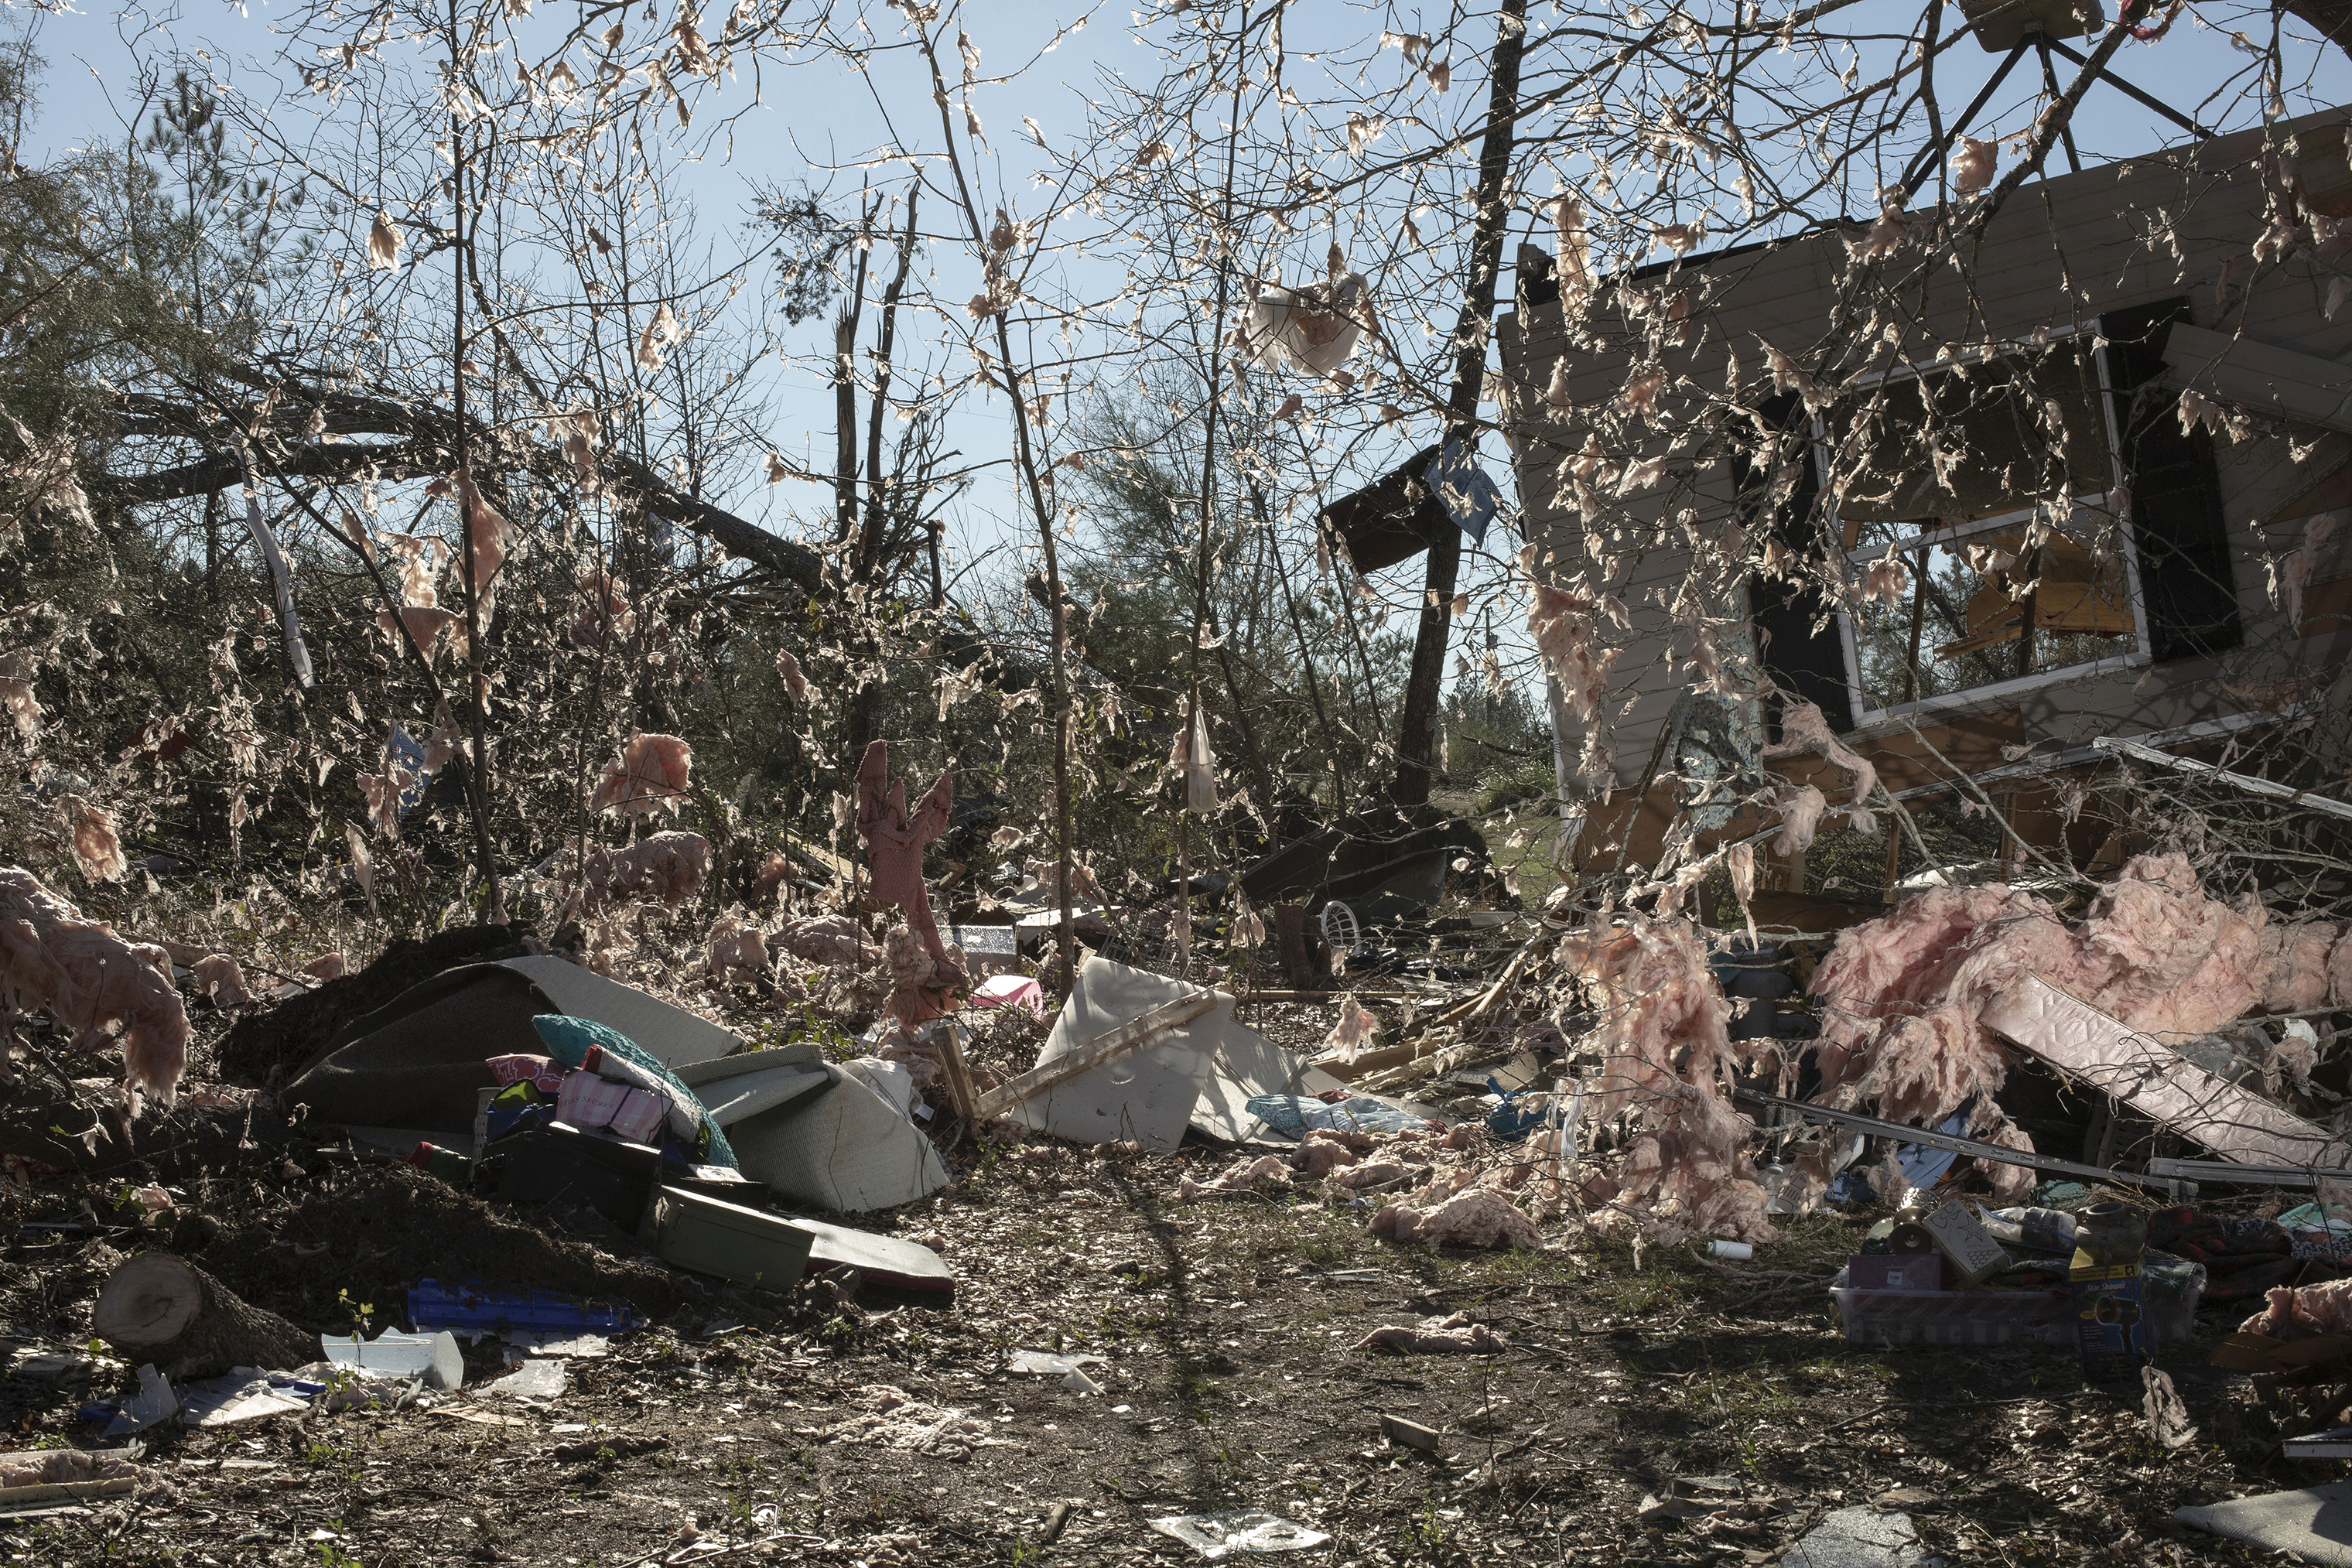 Insulation from a home was scattered in the trees after a tornado passed through the area, killing 23 people and destroying homes, in Beauregard, Ala., on March 4. (Bryan Anselm—Redux for TIME)